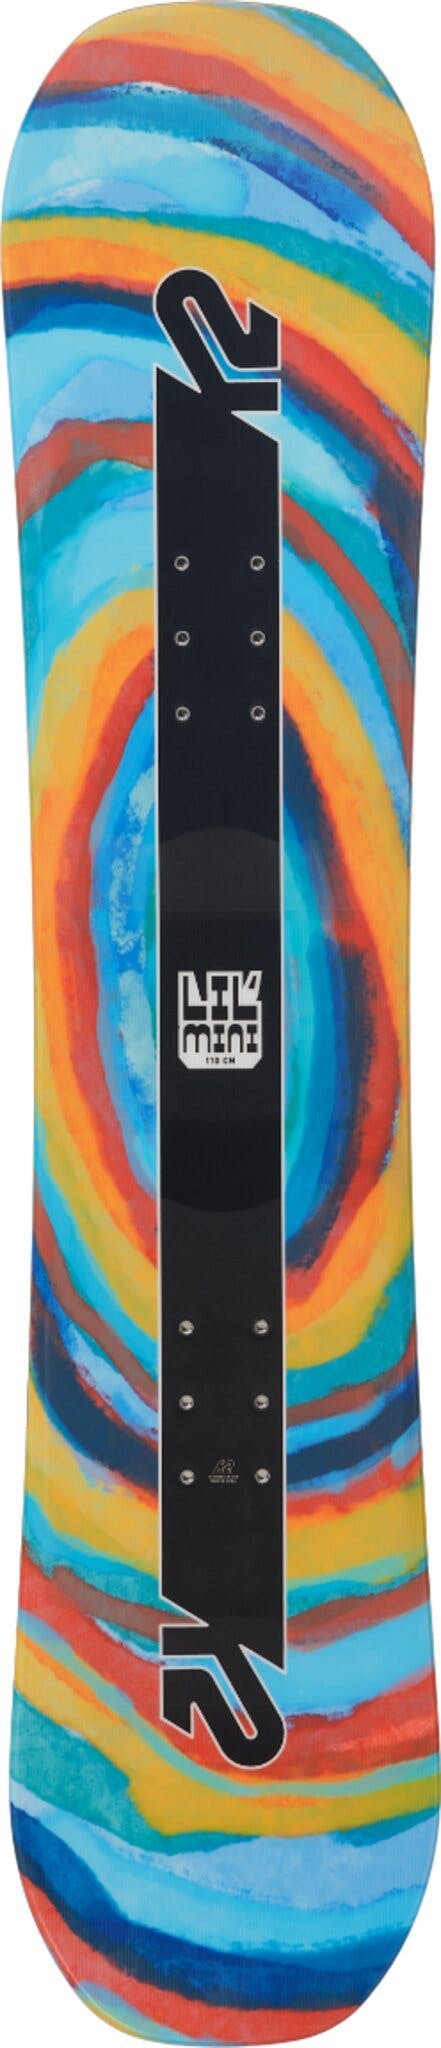 Product image for Lil' Mini Snowboard - Youth